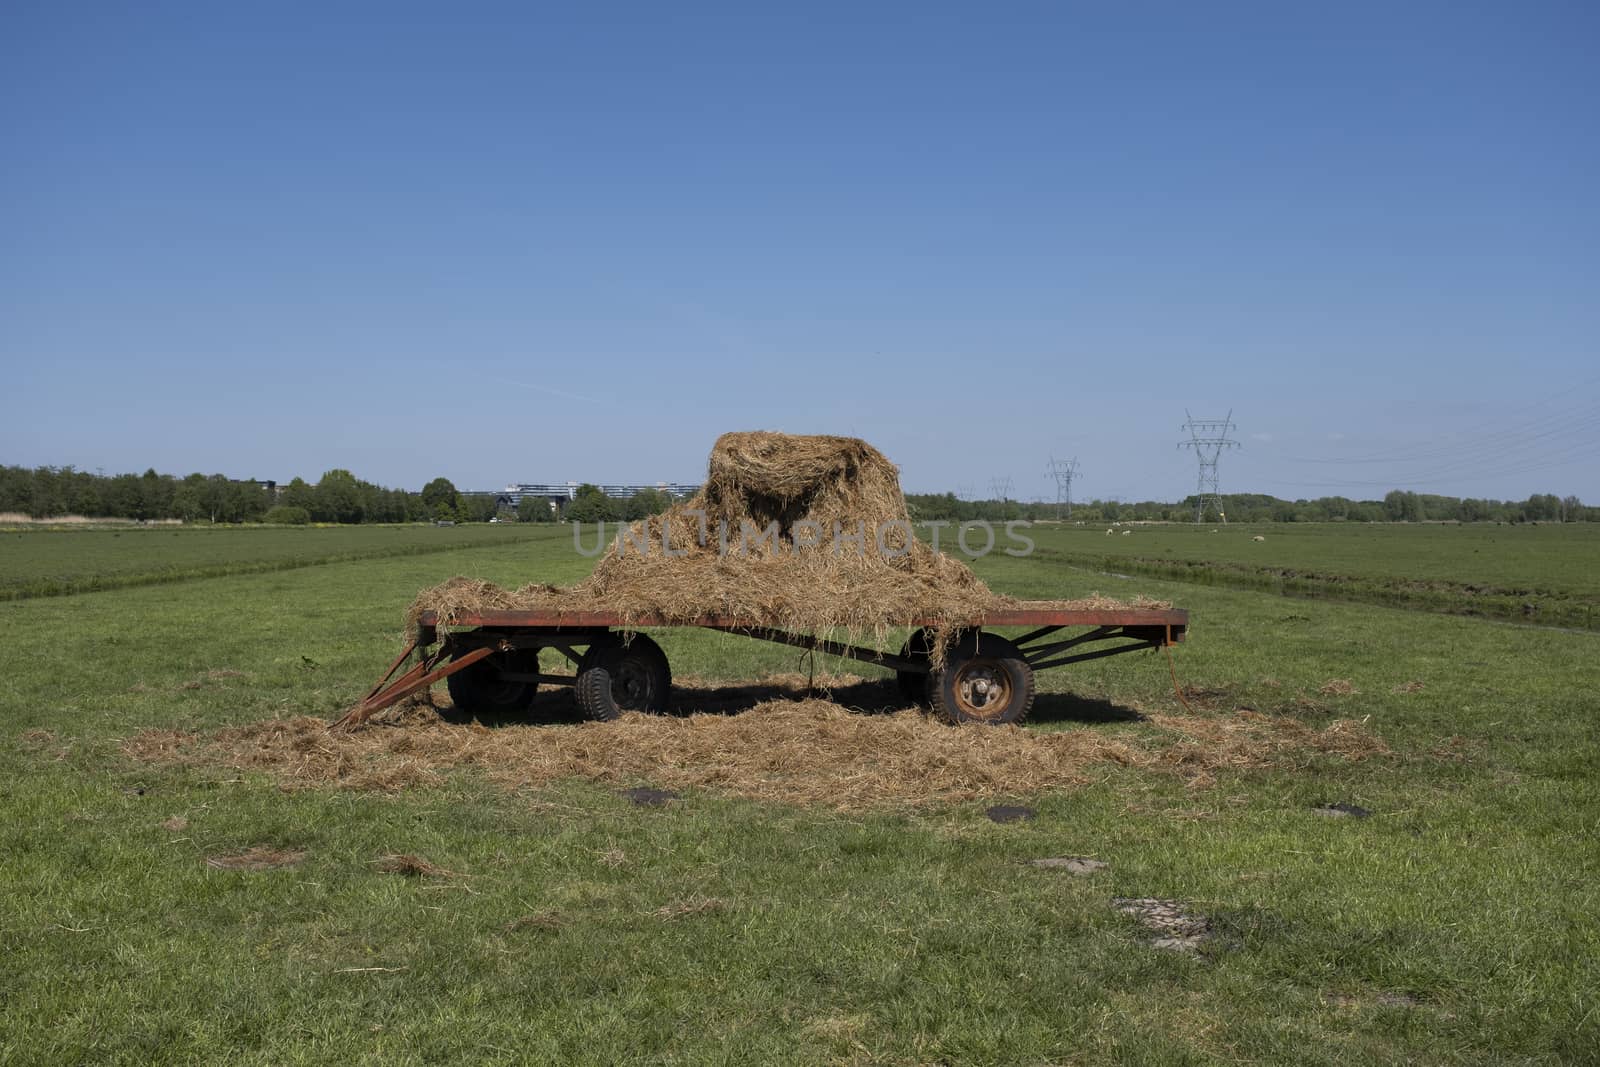 Old Hay Wagon in the Field against a blue sky in the netherlands